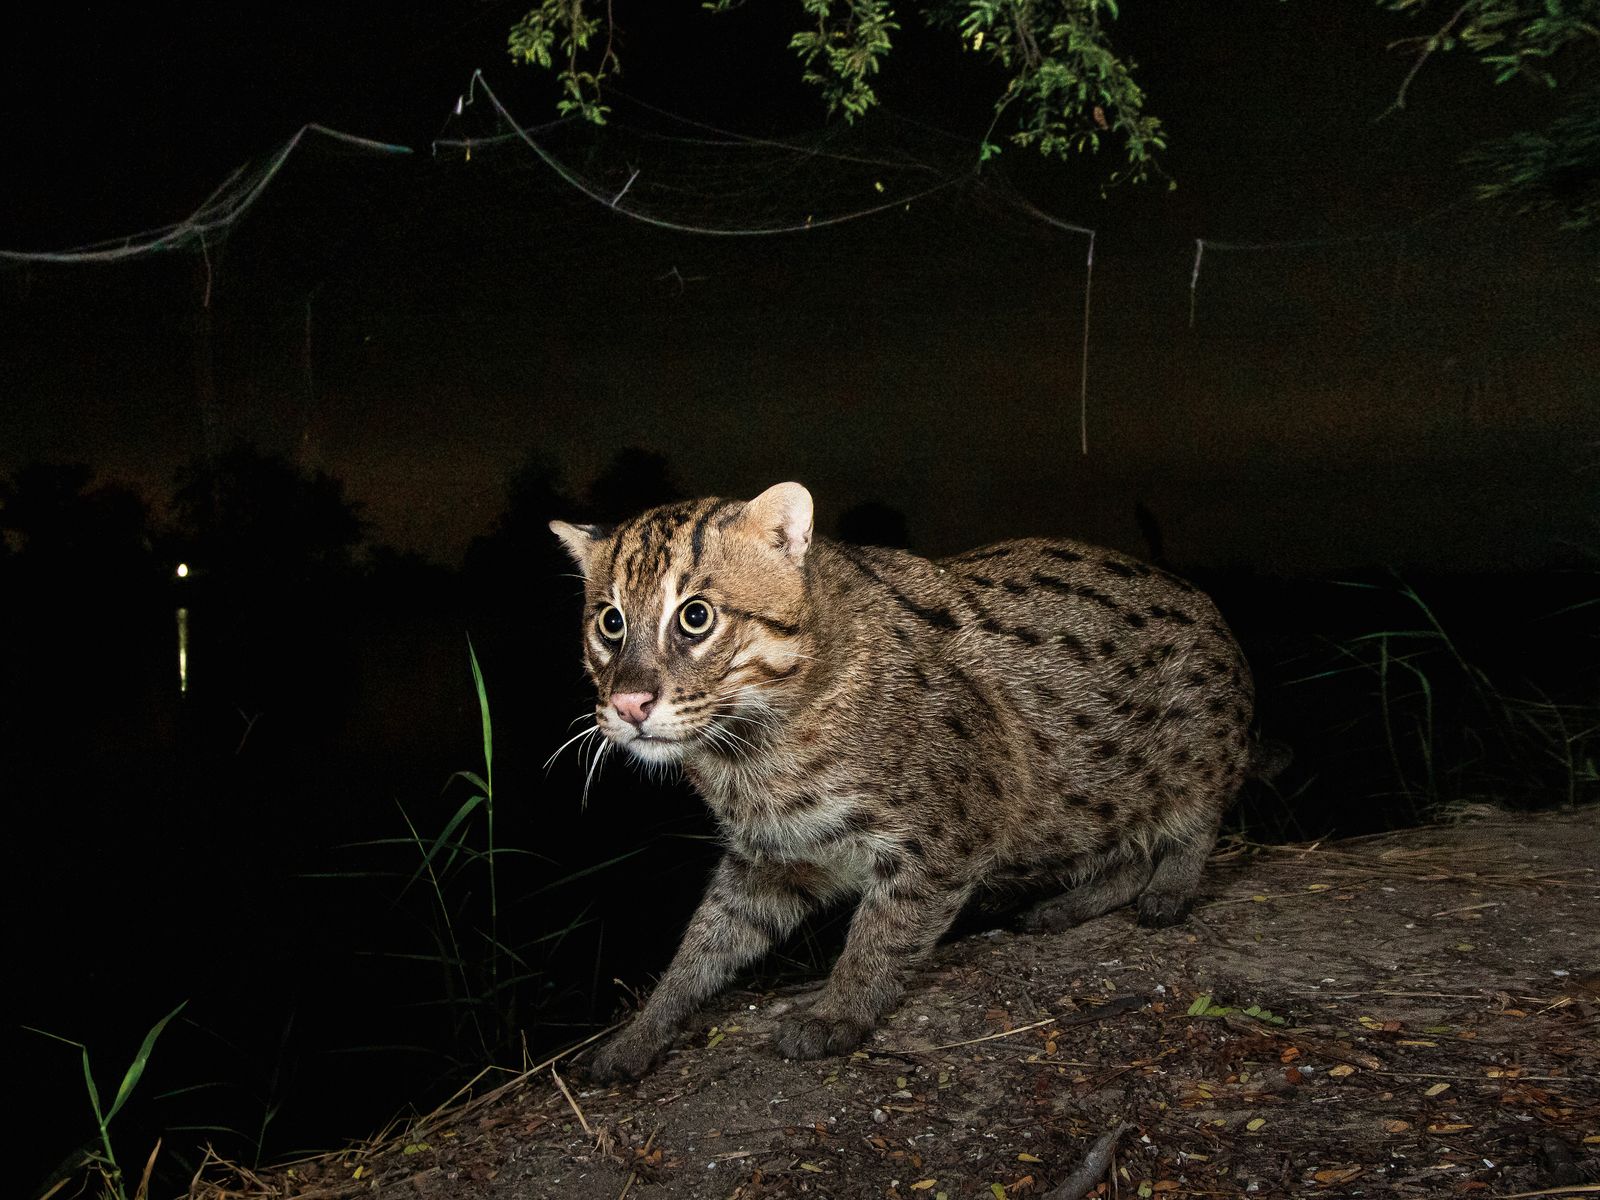 Fishing Cats Face Many Human Threats. What Can Be Done to Save Them?, Science